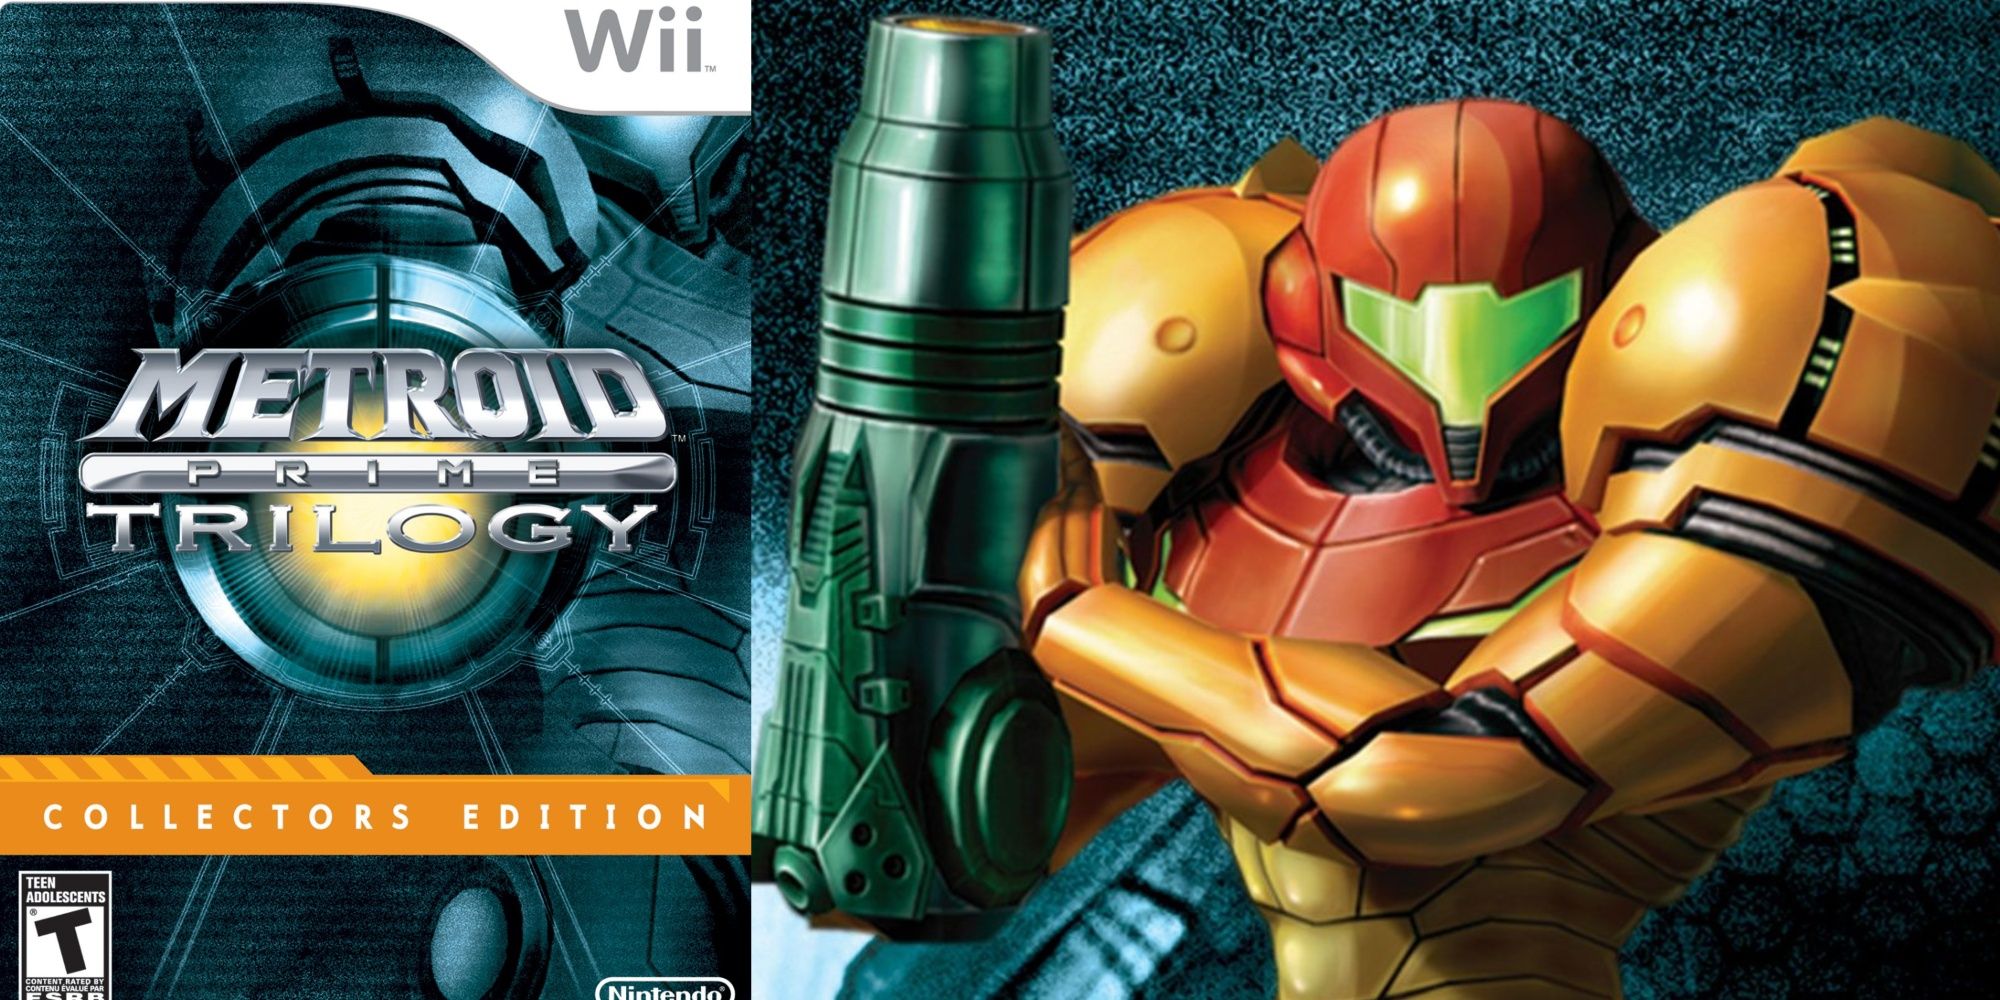 A split-image of the Wii artwork for the collector's edition of Metroid Prime Trilogy and a close-up of Samus in her suit with the cannon raised up.